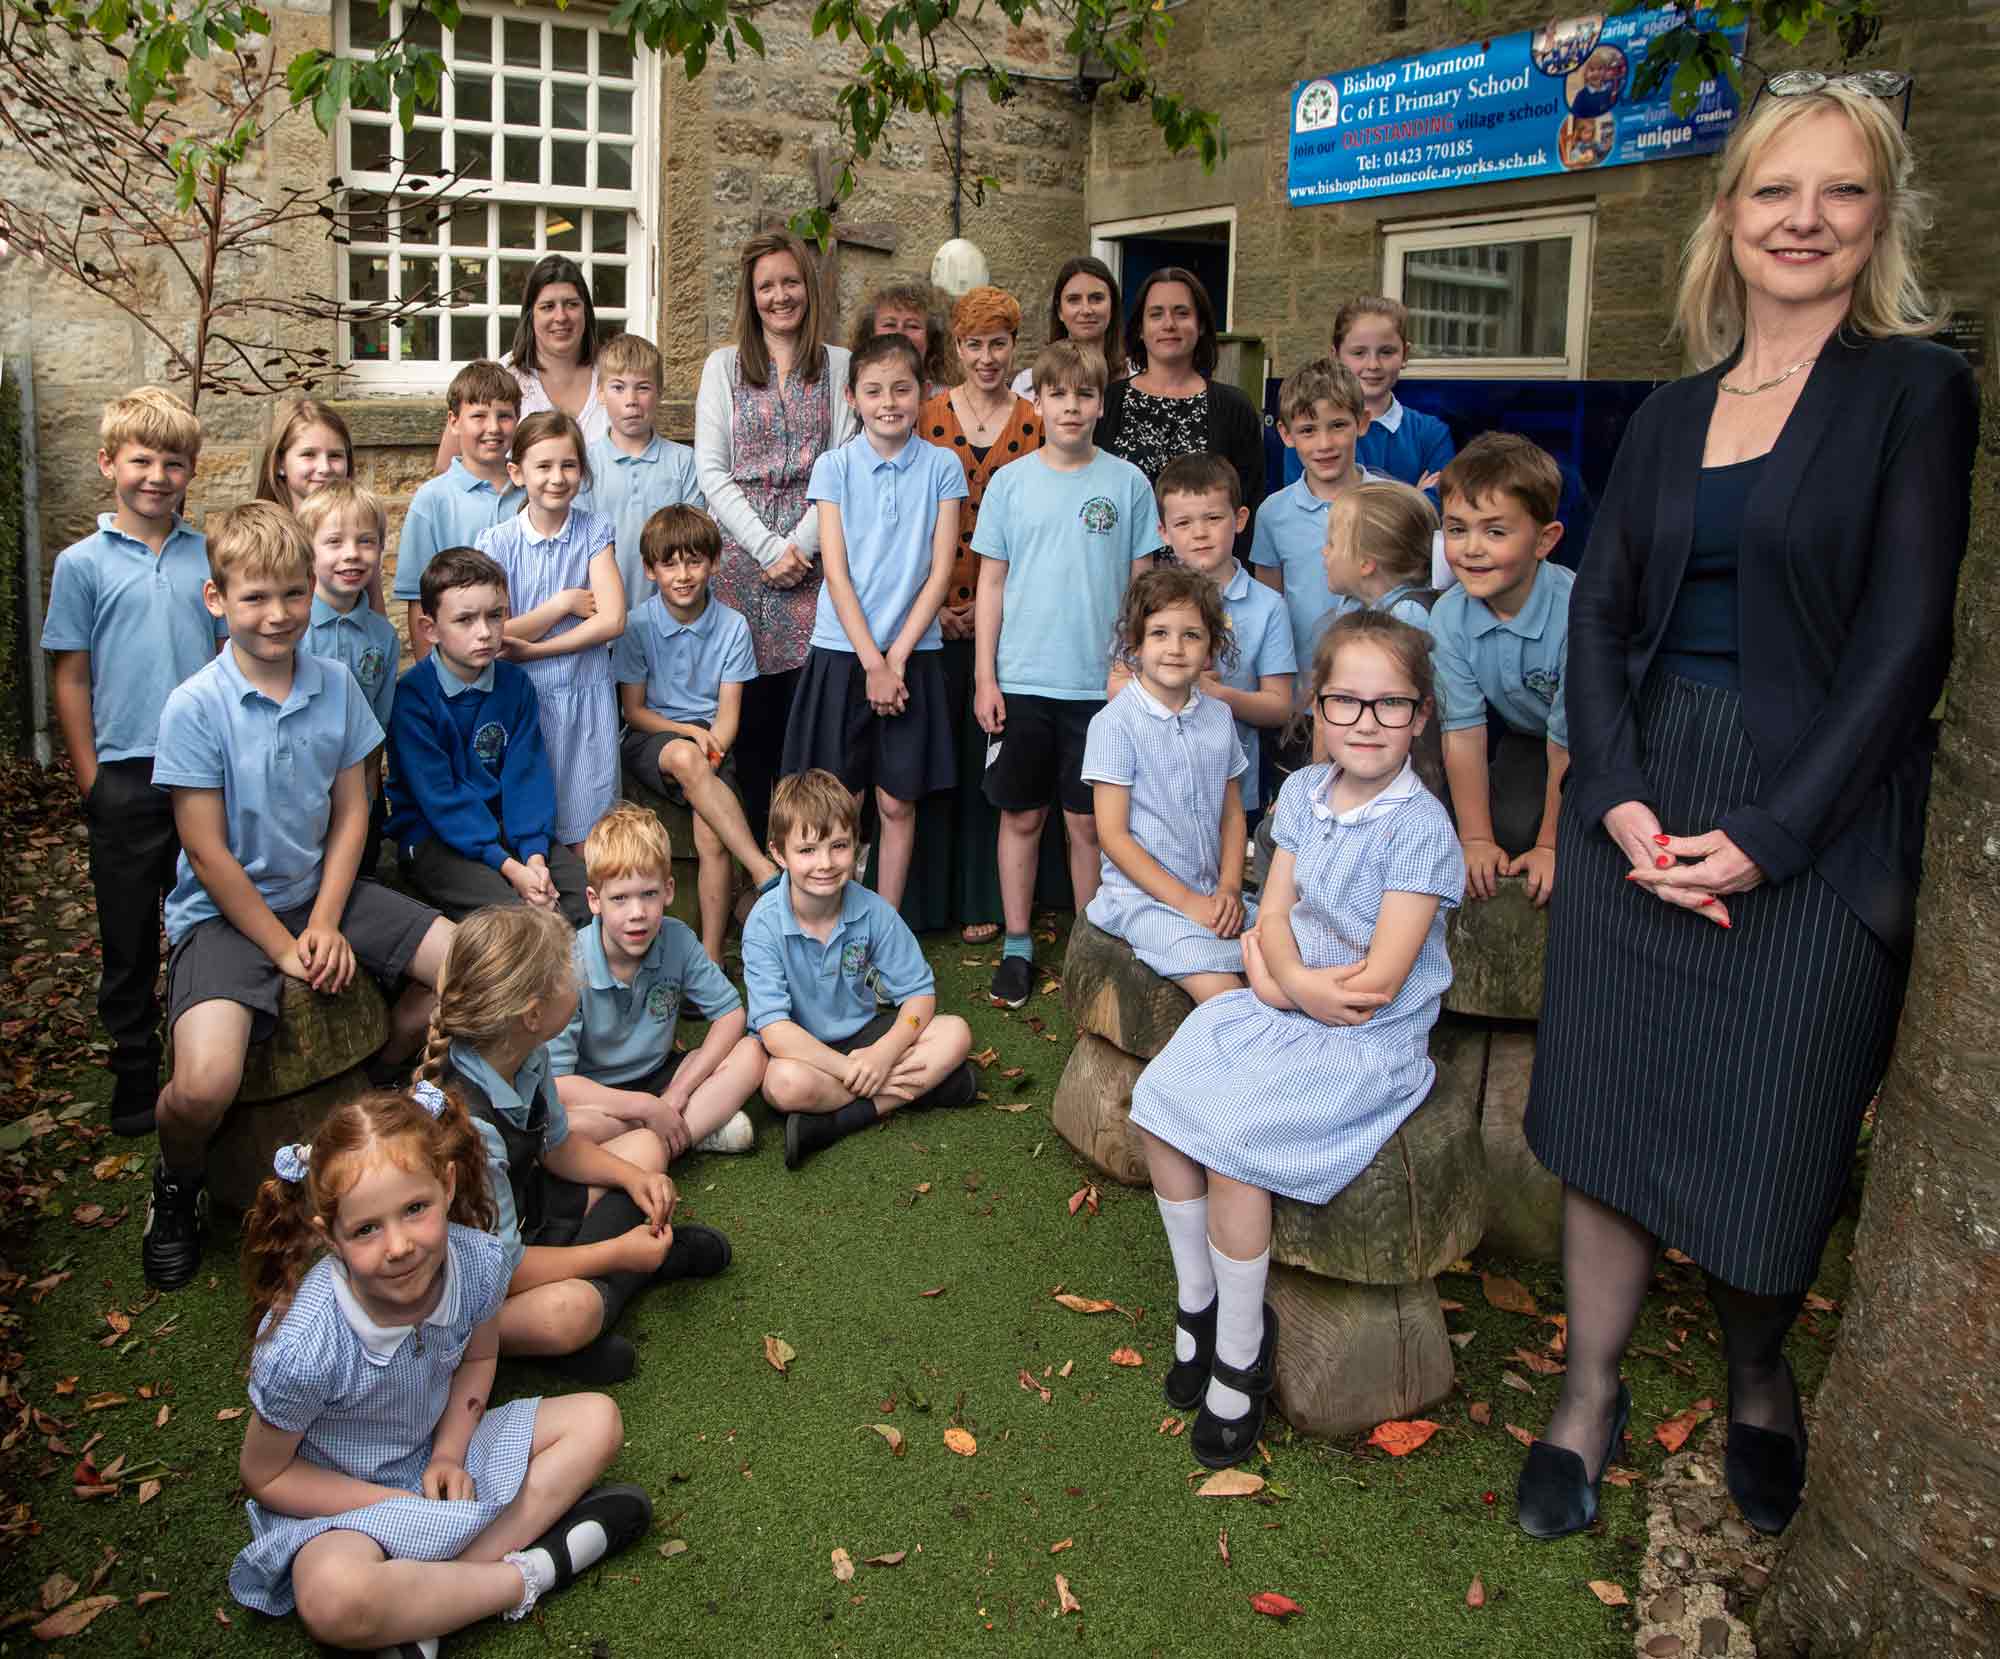 Liz Bedford, headteacher (right) with children and staff from Bishop Thornton Church of England Primary School